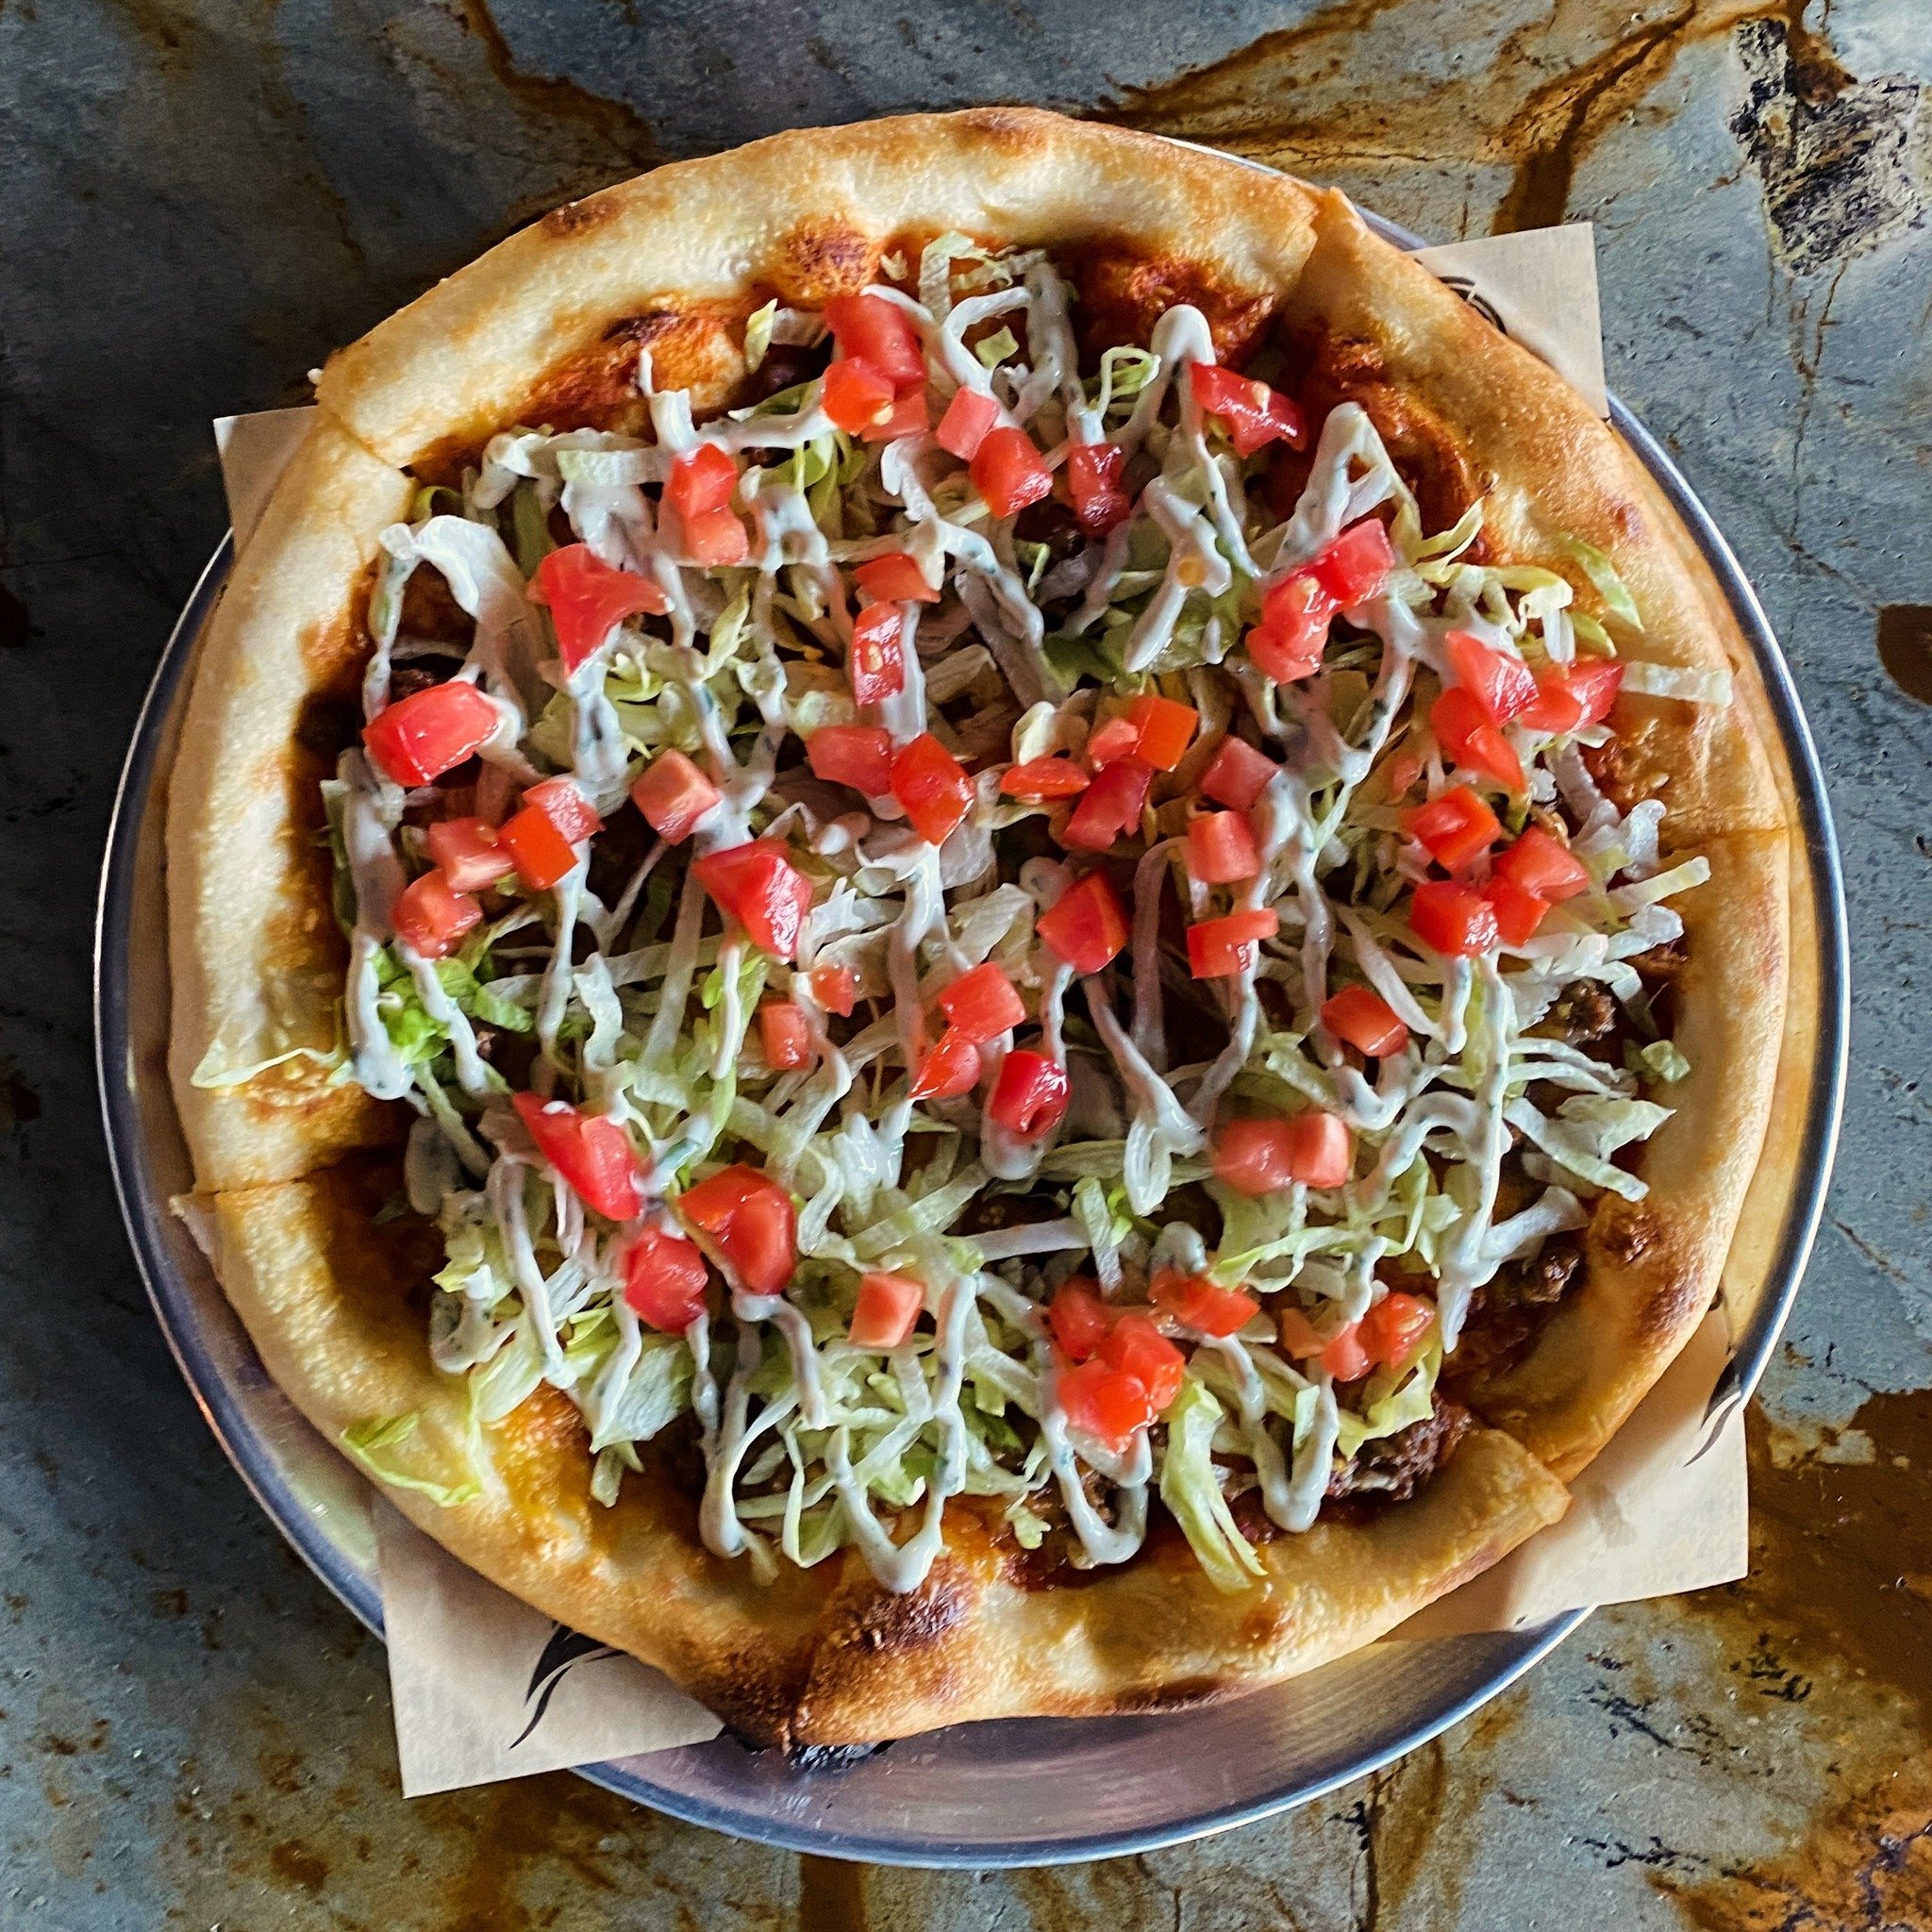 Celebrate Cinco de Mayo with this month&rsquo;s feature pizza! Taco sauce, seasoned ground beef, red onion &amp; cheddar jack, then lettuce, tomato &amp; cilantro lime crema after the bake. Make the celebration more festive with our delicious margari